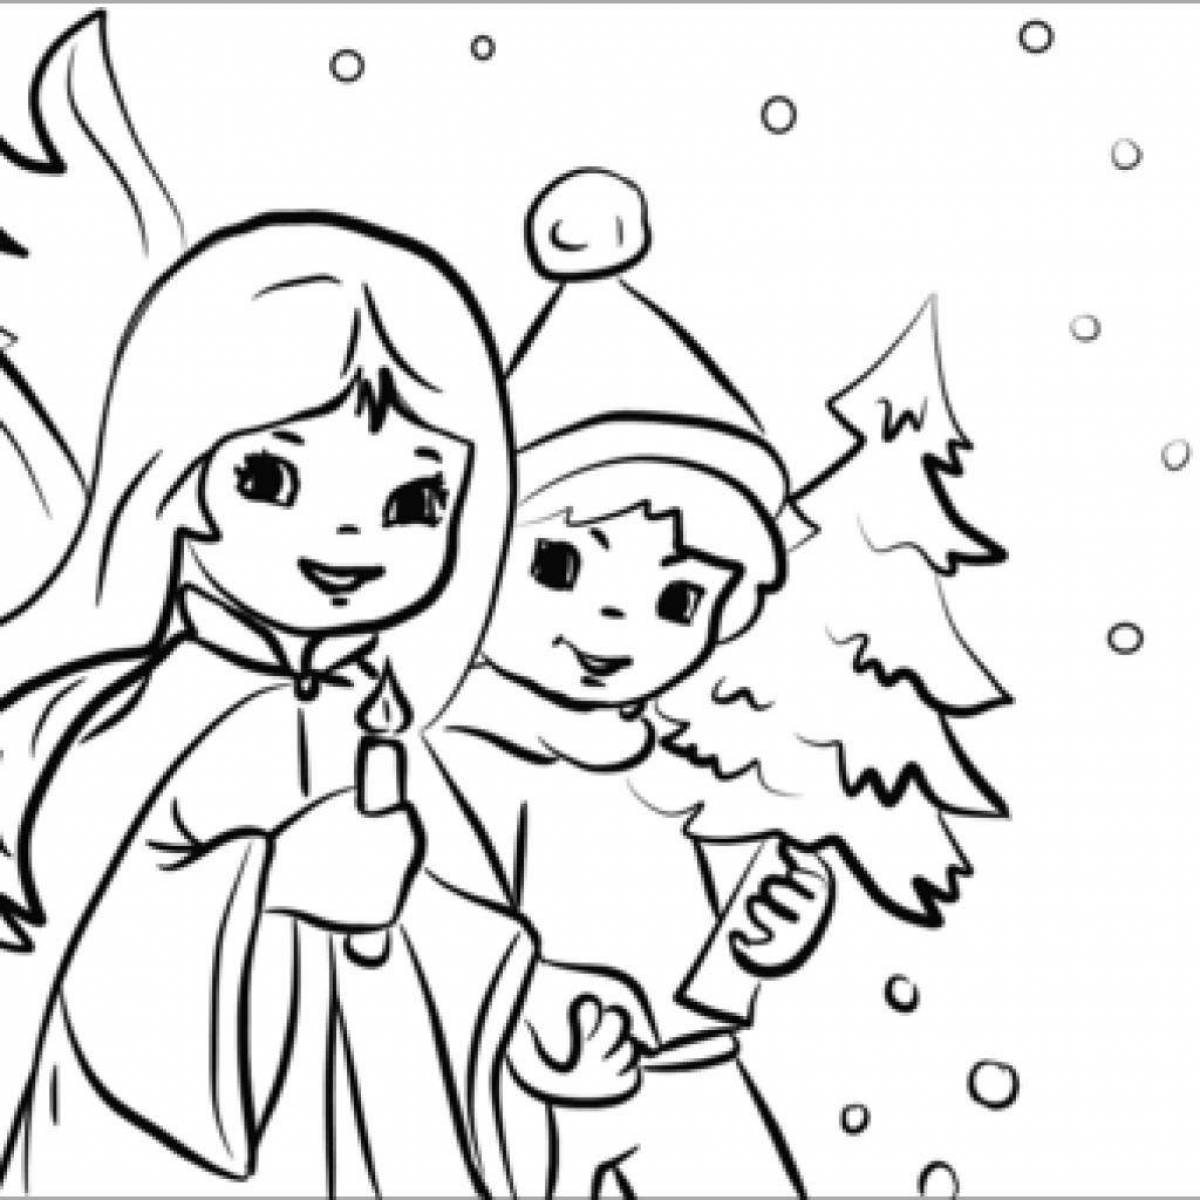 Inspirational Christmas coloring book for 6-7 year olds